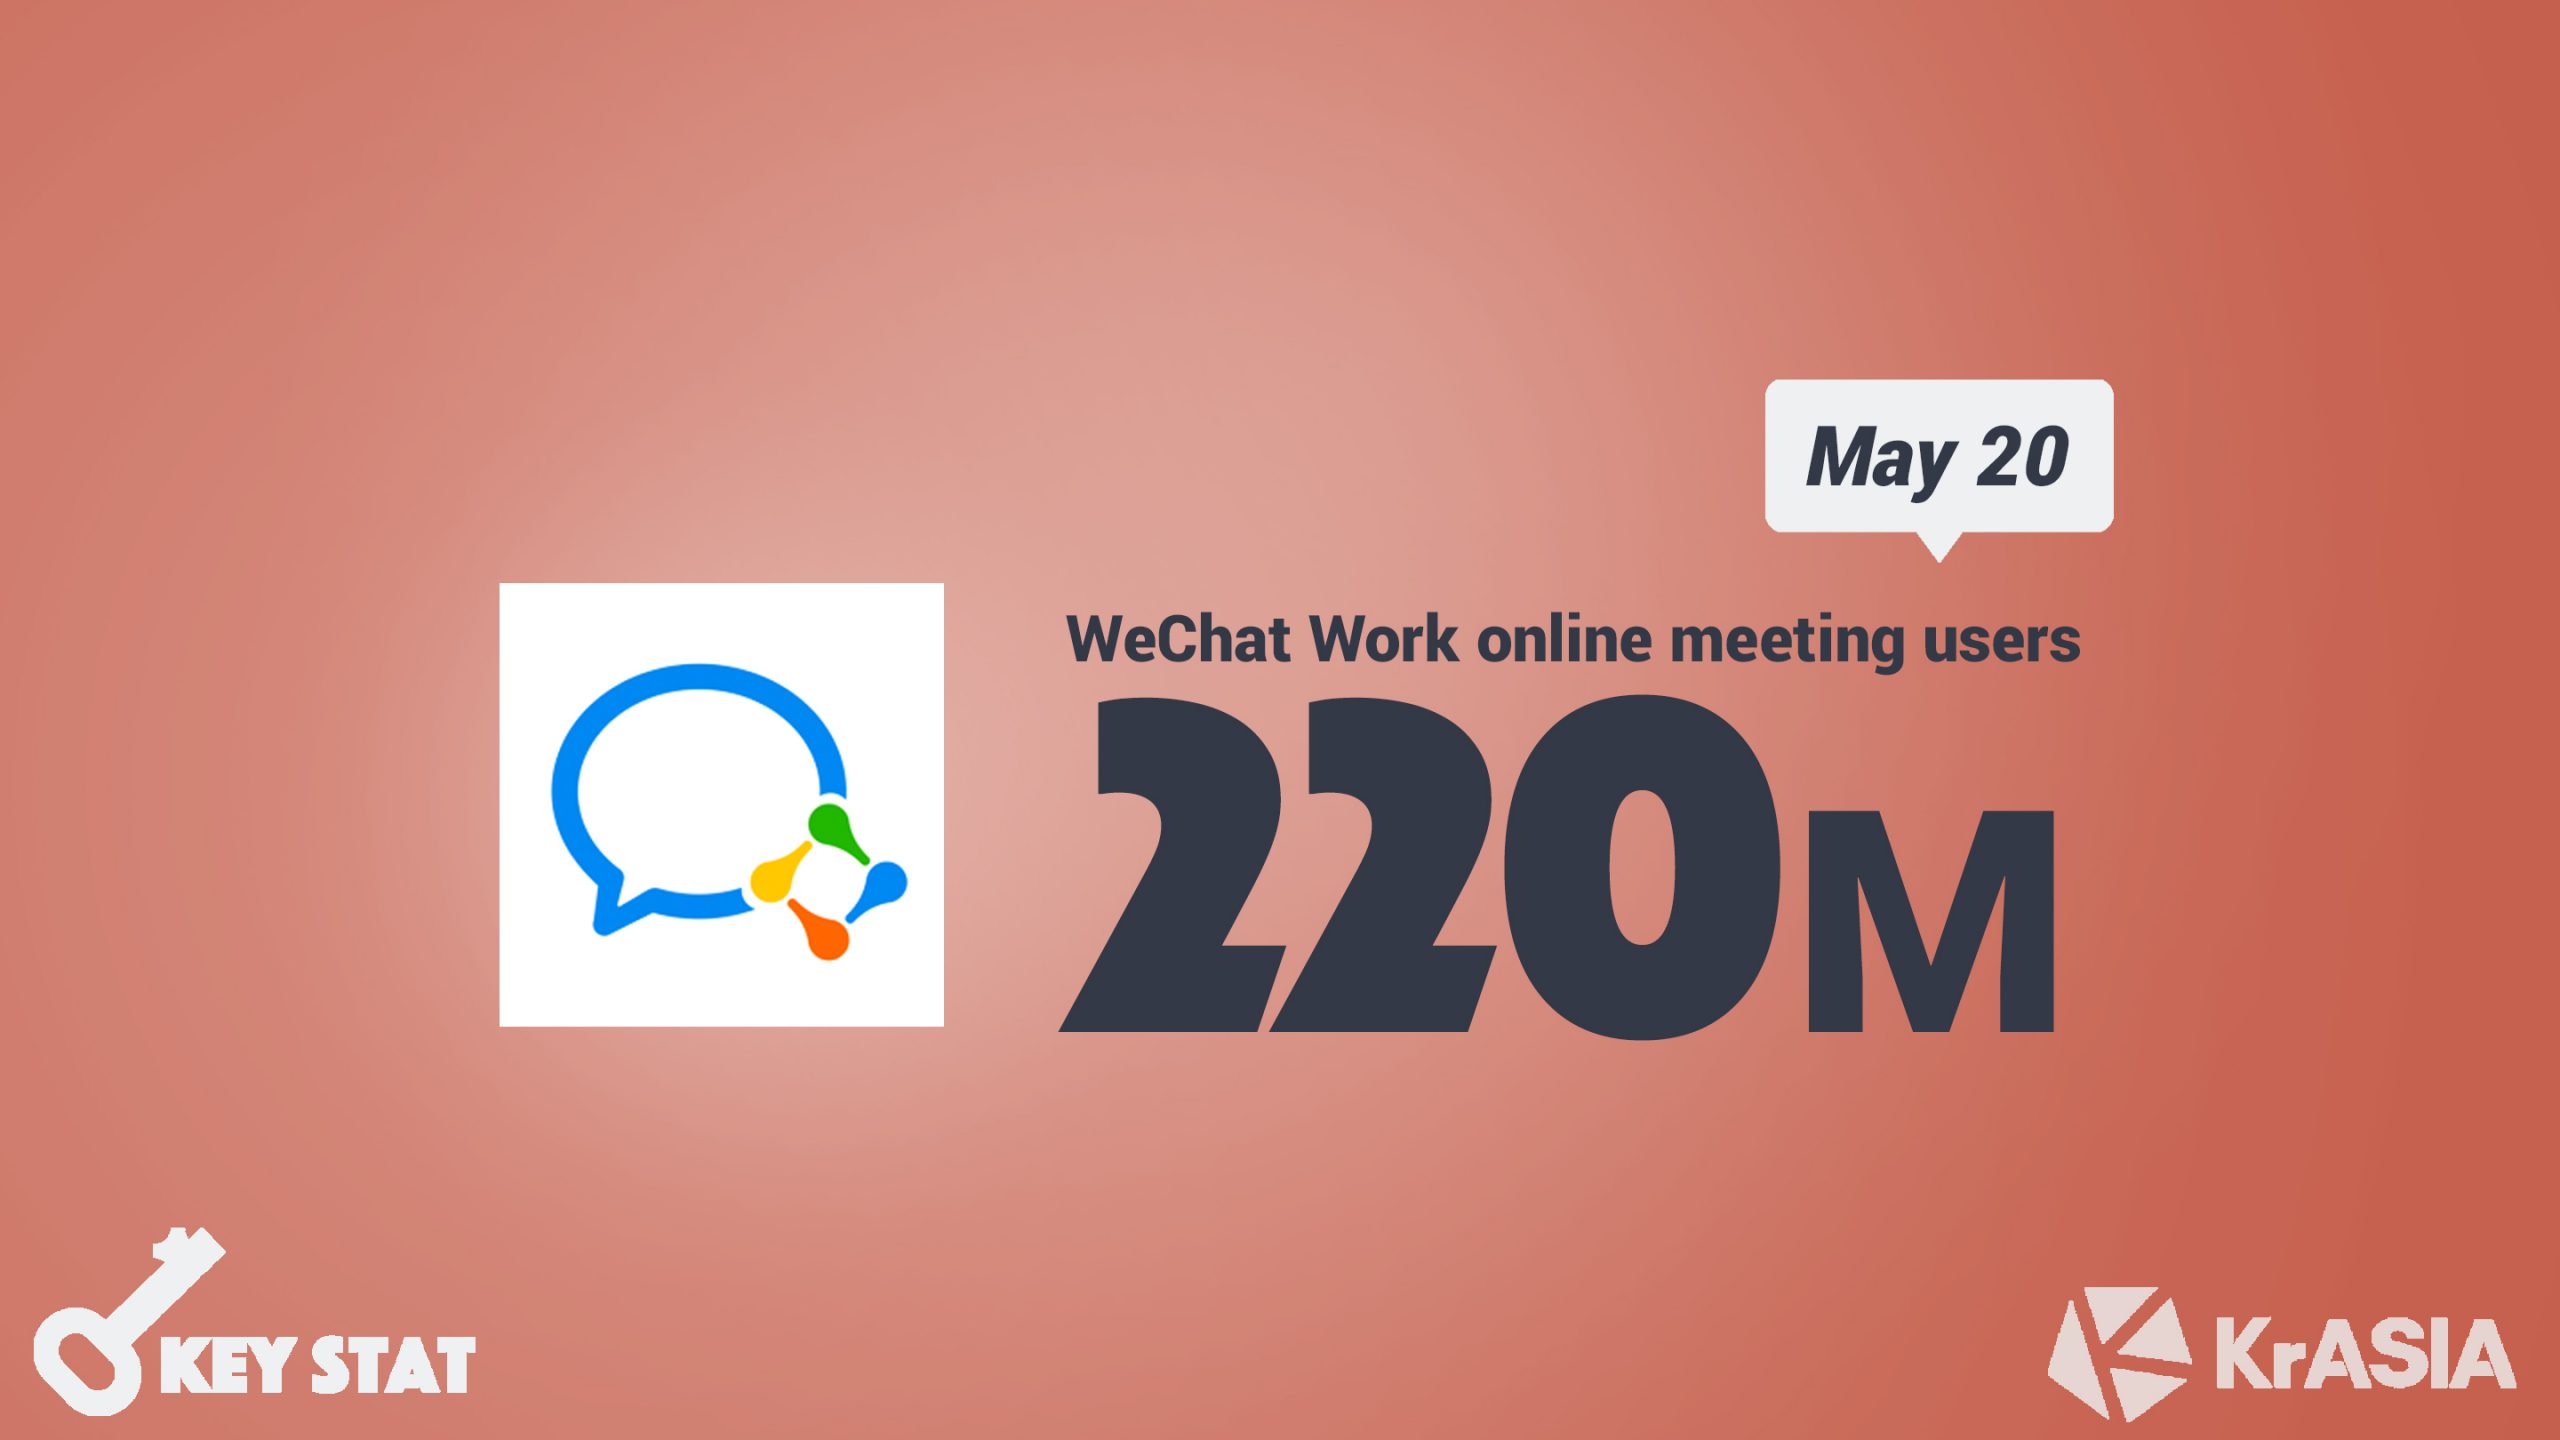 KEY STAT | 220 million people hosted online meetings on WeChat Work